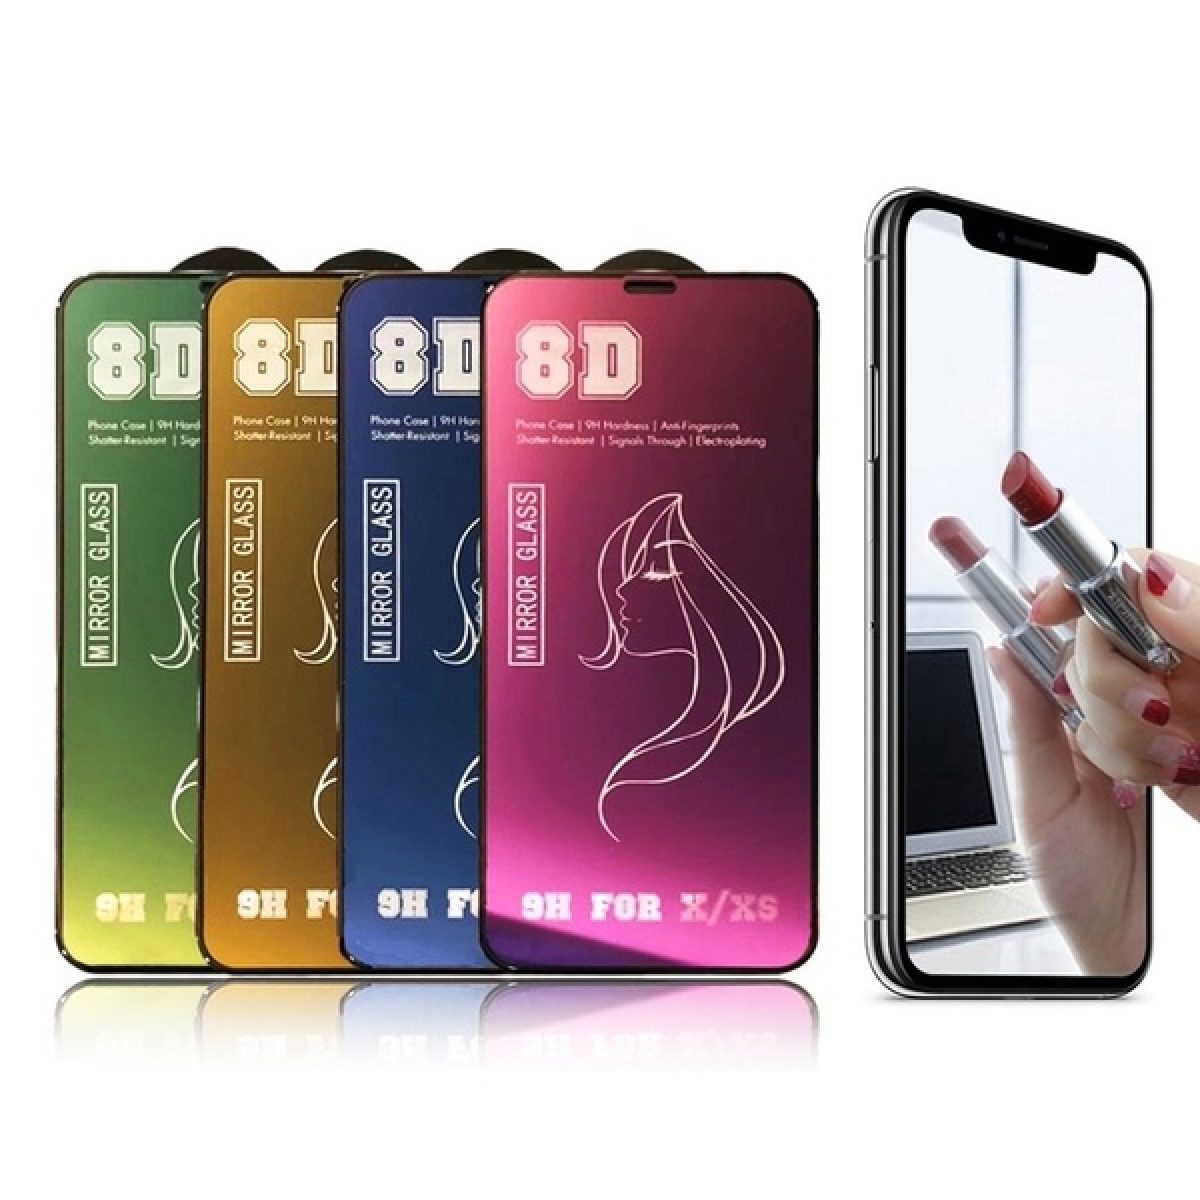 https://celltophone.com/wp-content/uploads/2020/01/8D-Colorful-Mirror-Tempered-Glass-1200x1200.jpg